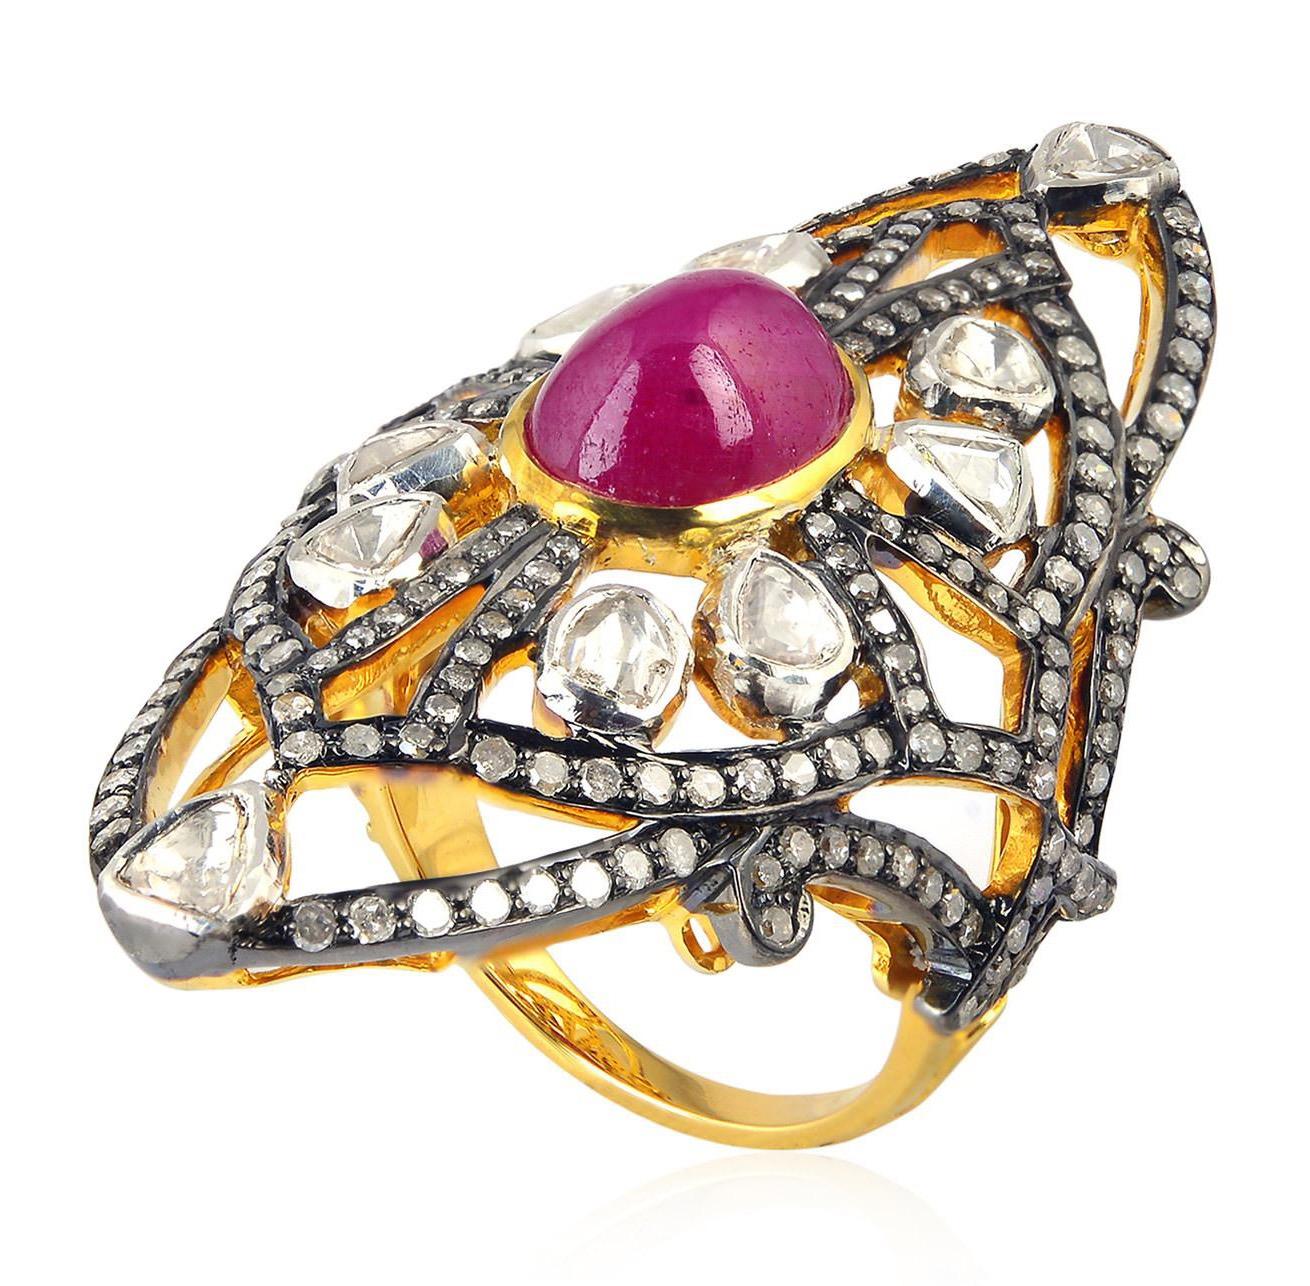 This ring has been meticulously crafted from 18-karat gold & sterling silver with blackened finish. Handcrafted in 4.25 carats ruby & illuminated with 2.48 carats diamonds. 

The ring is a size 7 and may be resized to larger or smaller upon request.